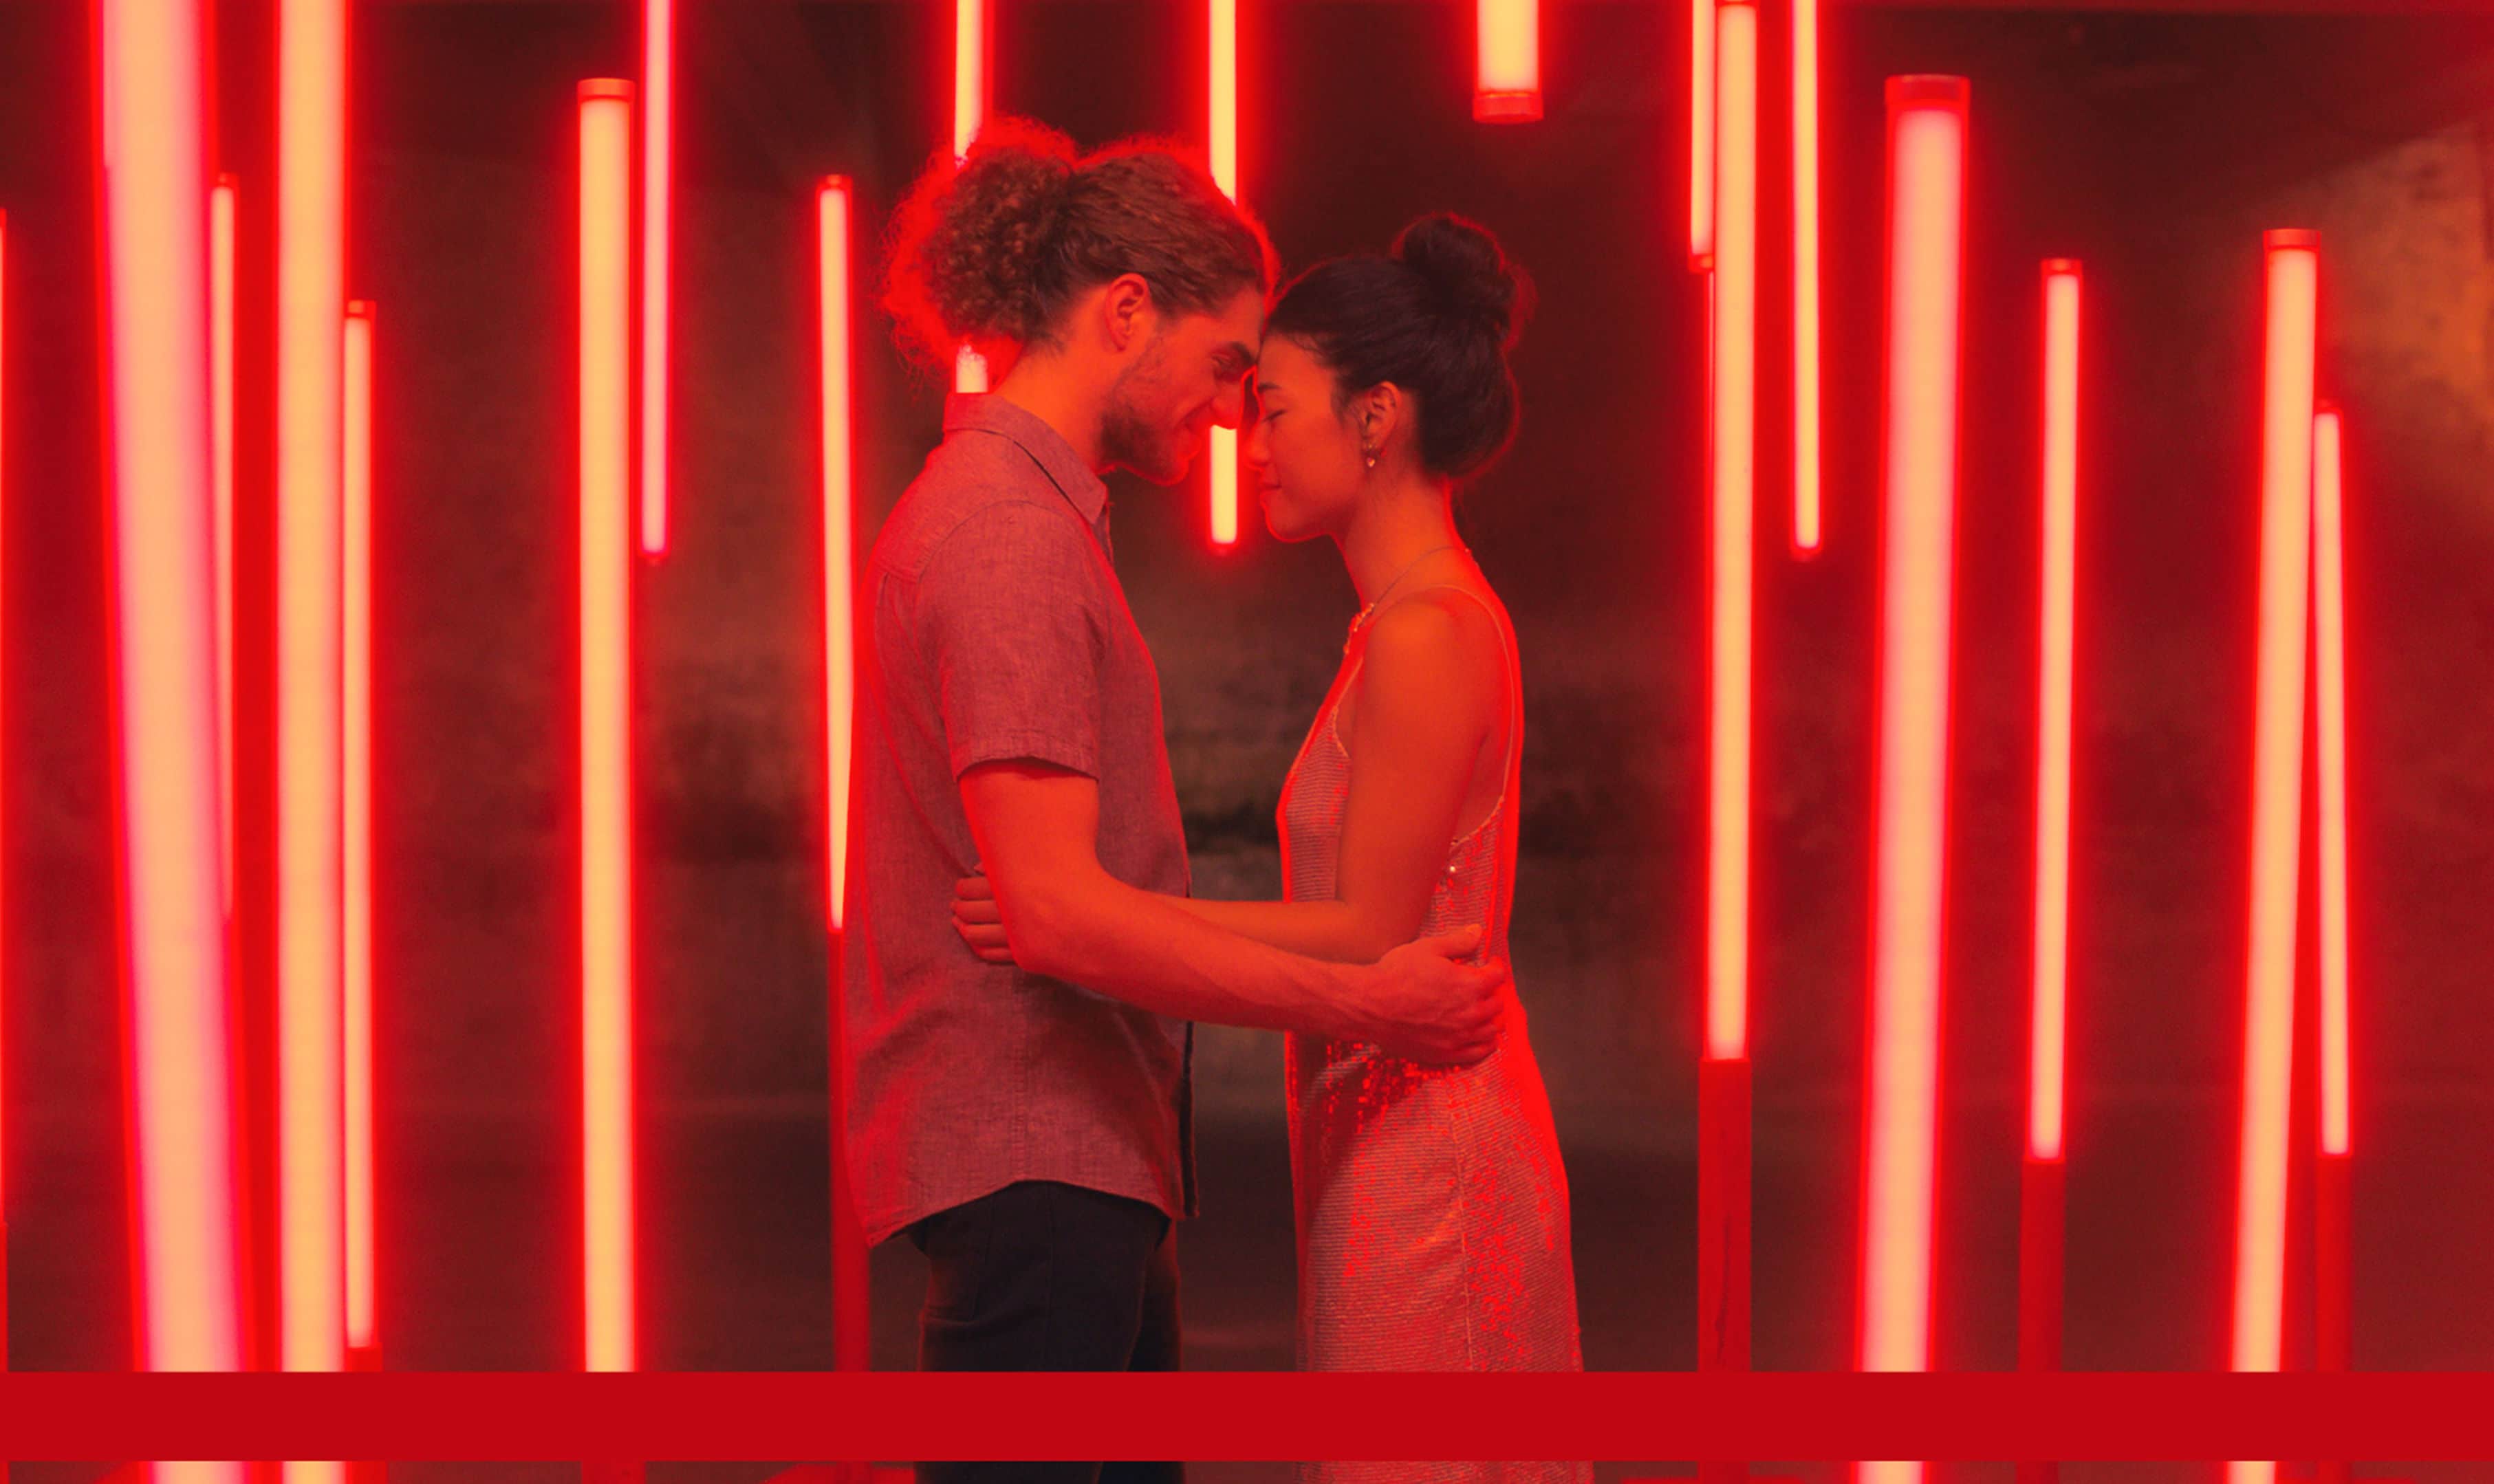 A couple holding each other with a red background